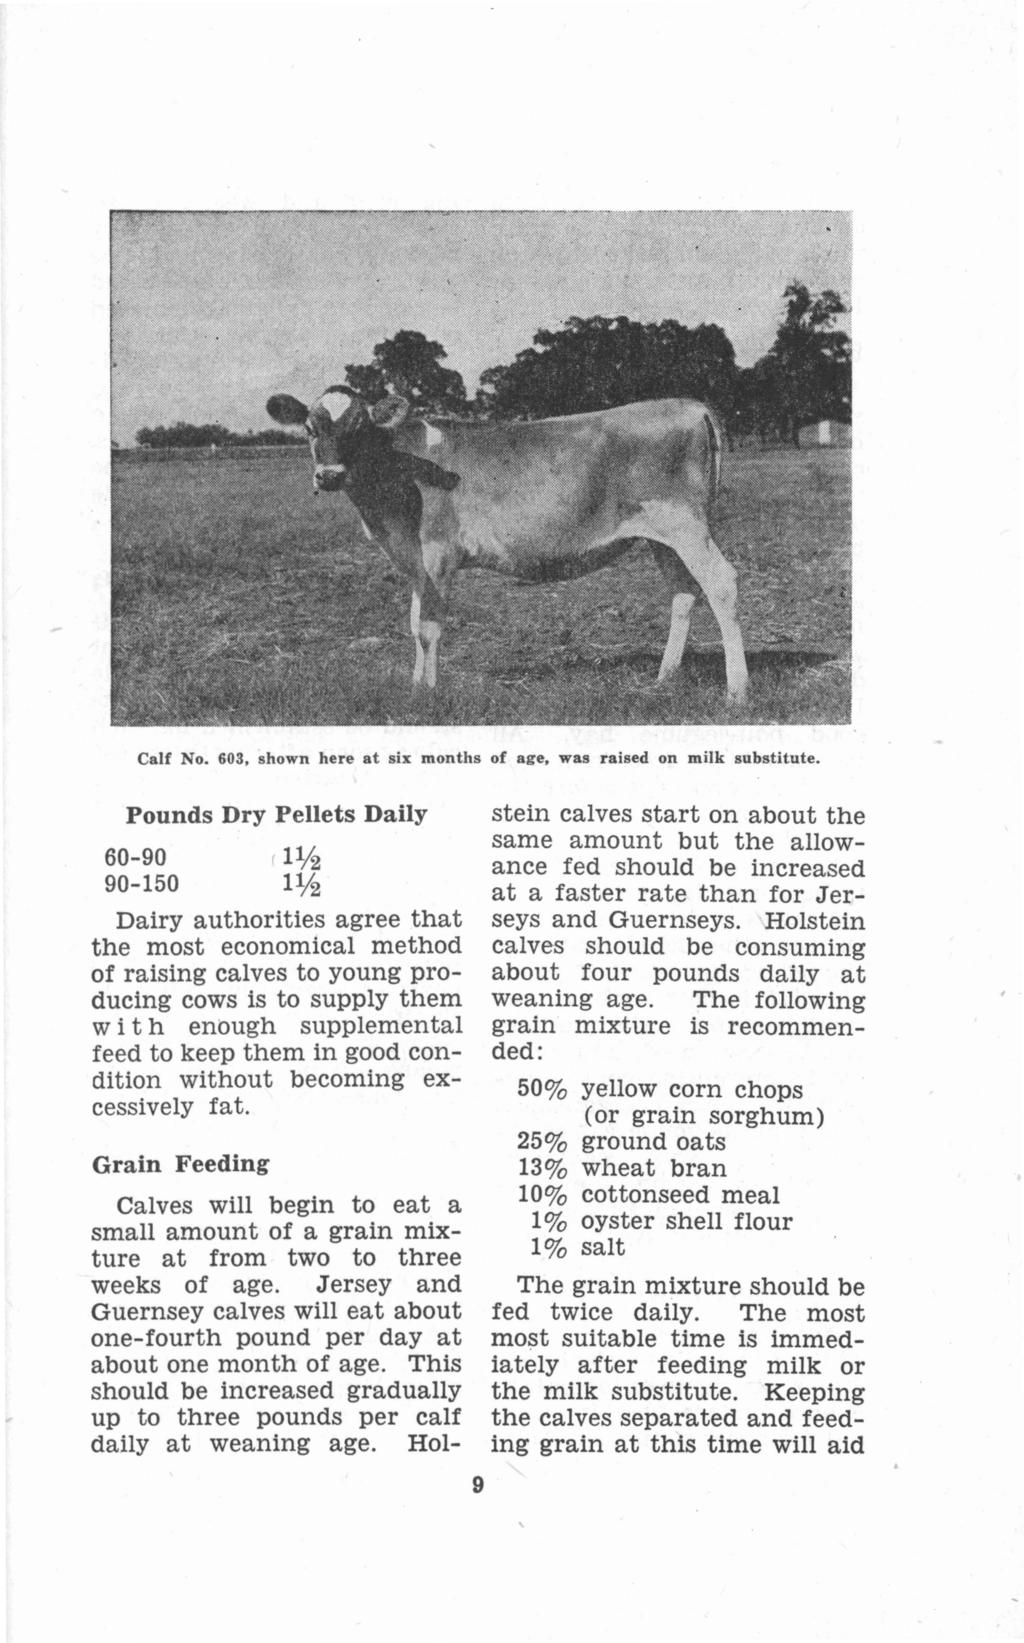 Calf No. 603, shown here at six months of age, was raised on milk substitute.